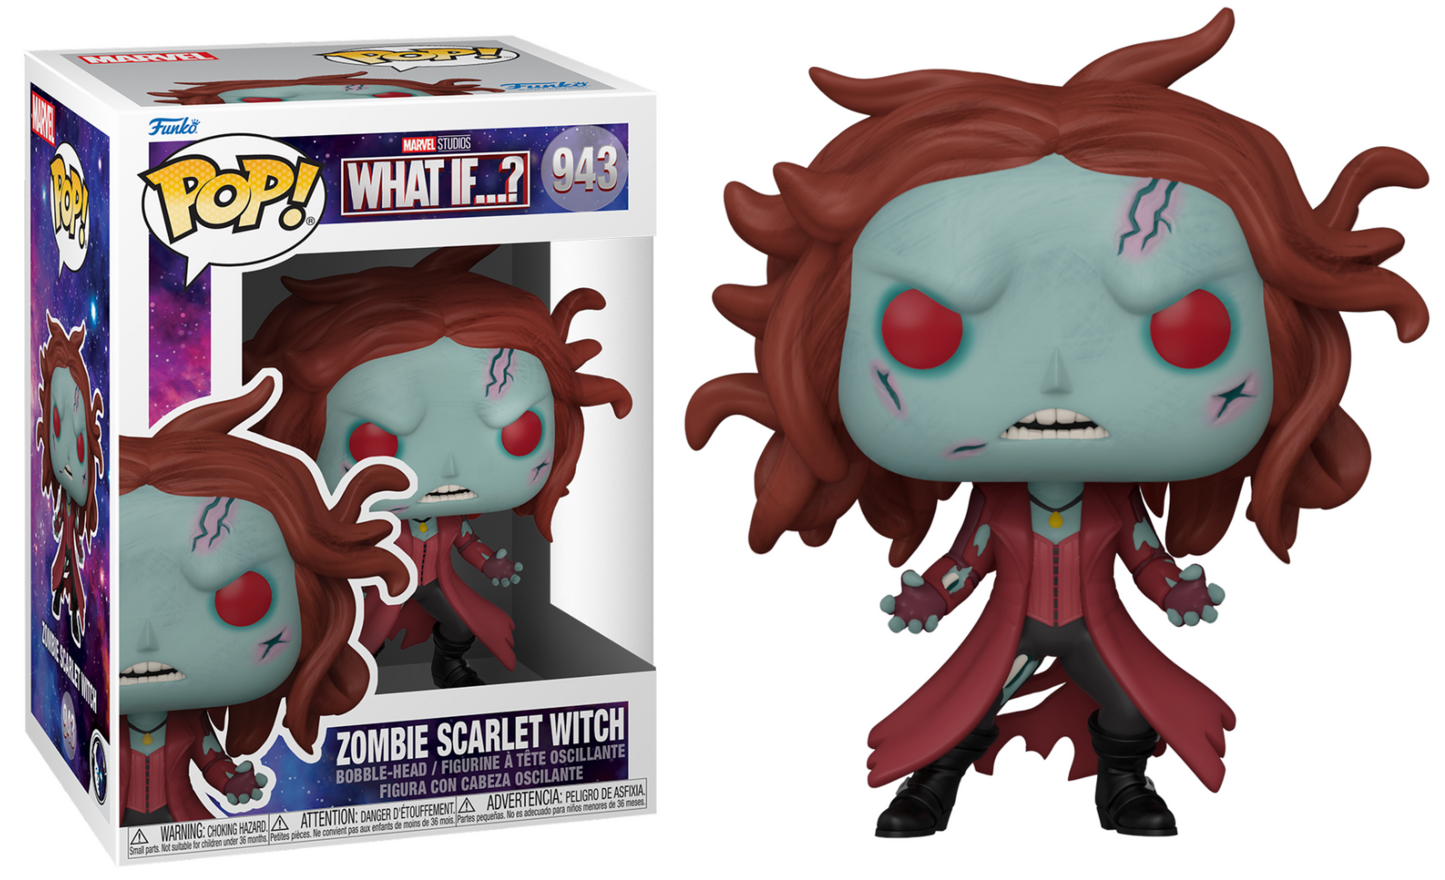 MARVEL WHAT IF - POP N° 943 - Zombie Scarlet Witch